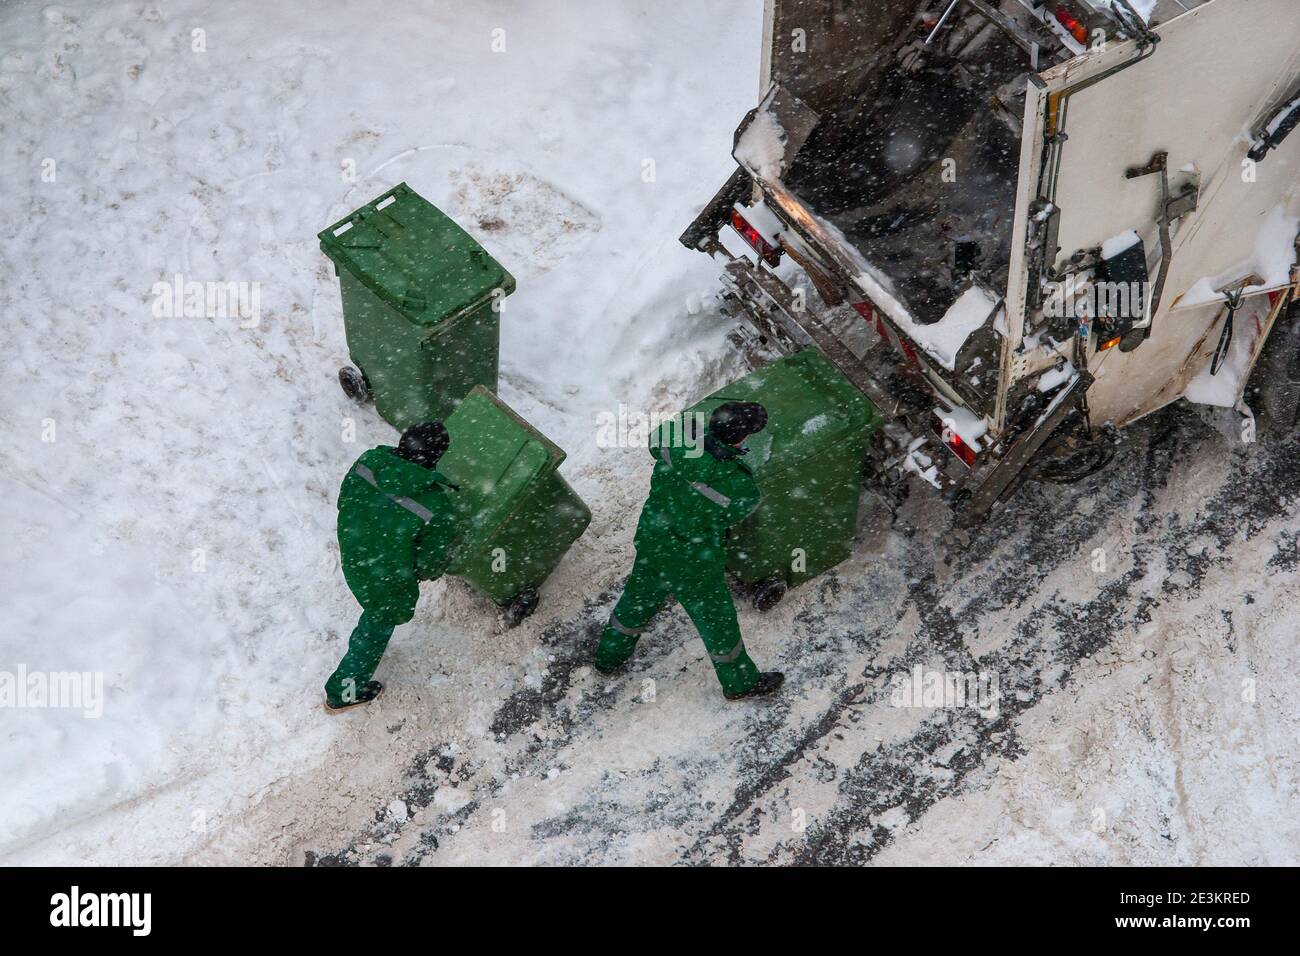 garbage collection workers pick up household waste in winter Stock Photo